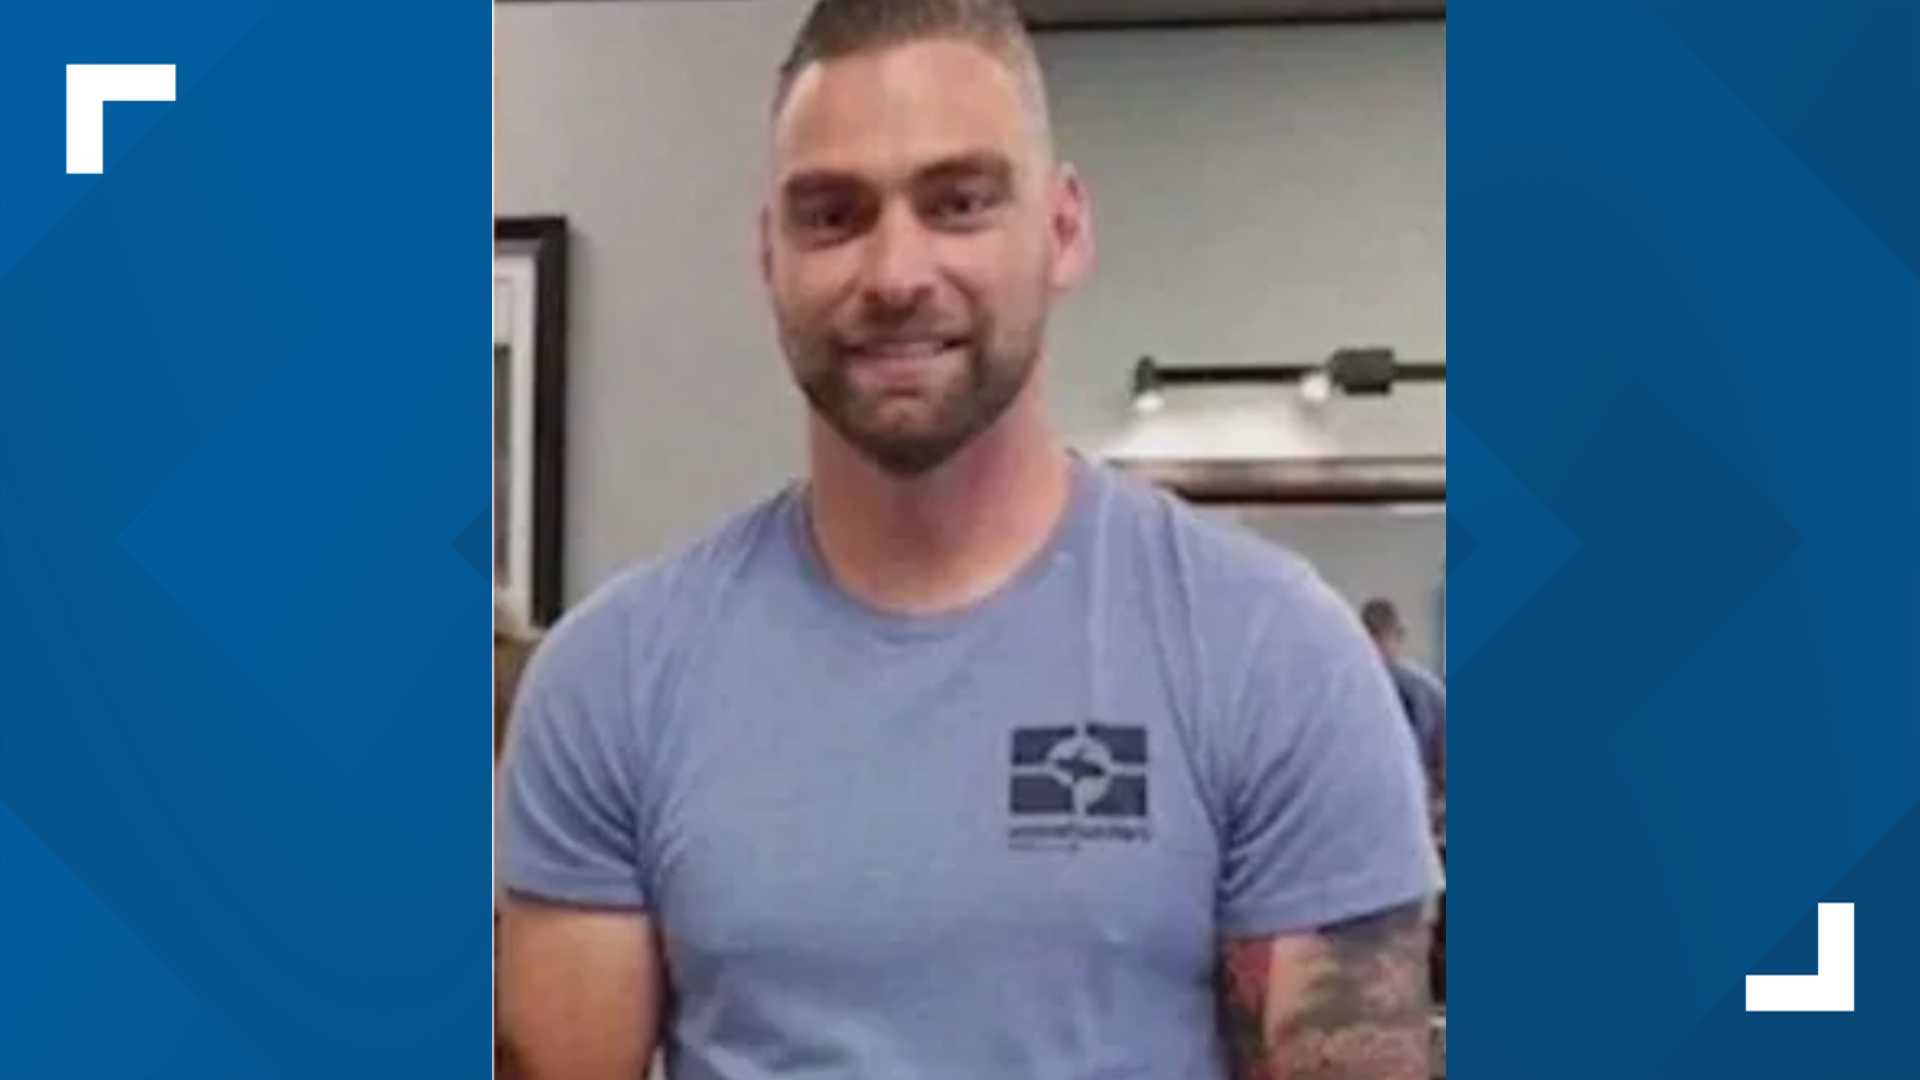 Jesse Conger is a missing Marine who was last seen at his apartment in Scottsdale on August 14. He suffers from PTSD after years in the Marines and as a rescue diver as part of a search-and-rescue team. Jesse is 6'2" around 200 pounds, with brown hair and blue eyes. He has tattoos on his left arm and the word "Rise" tattooed on his left chest. He may be driving a 2015 Toyota Camry with Nevada plate 696G03. If you see him contact the Scottsdale PD. For more on this story: https://12ne.ws/2KYokAU